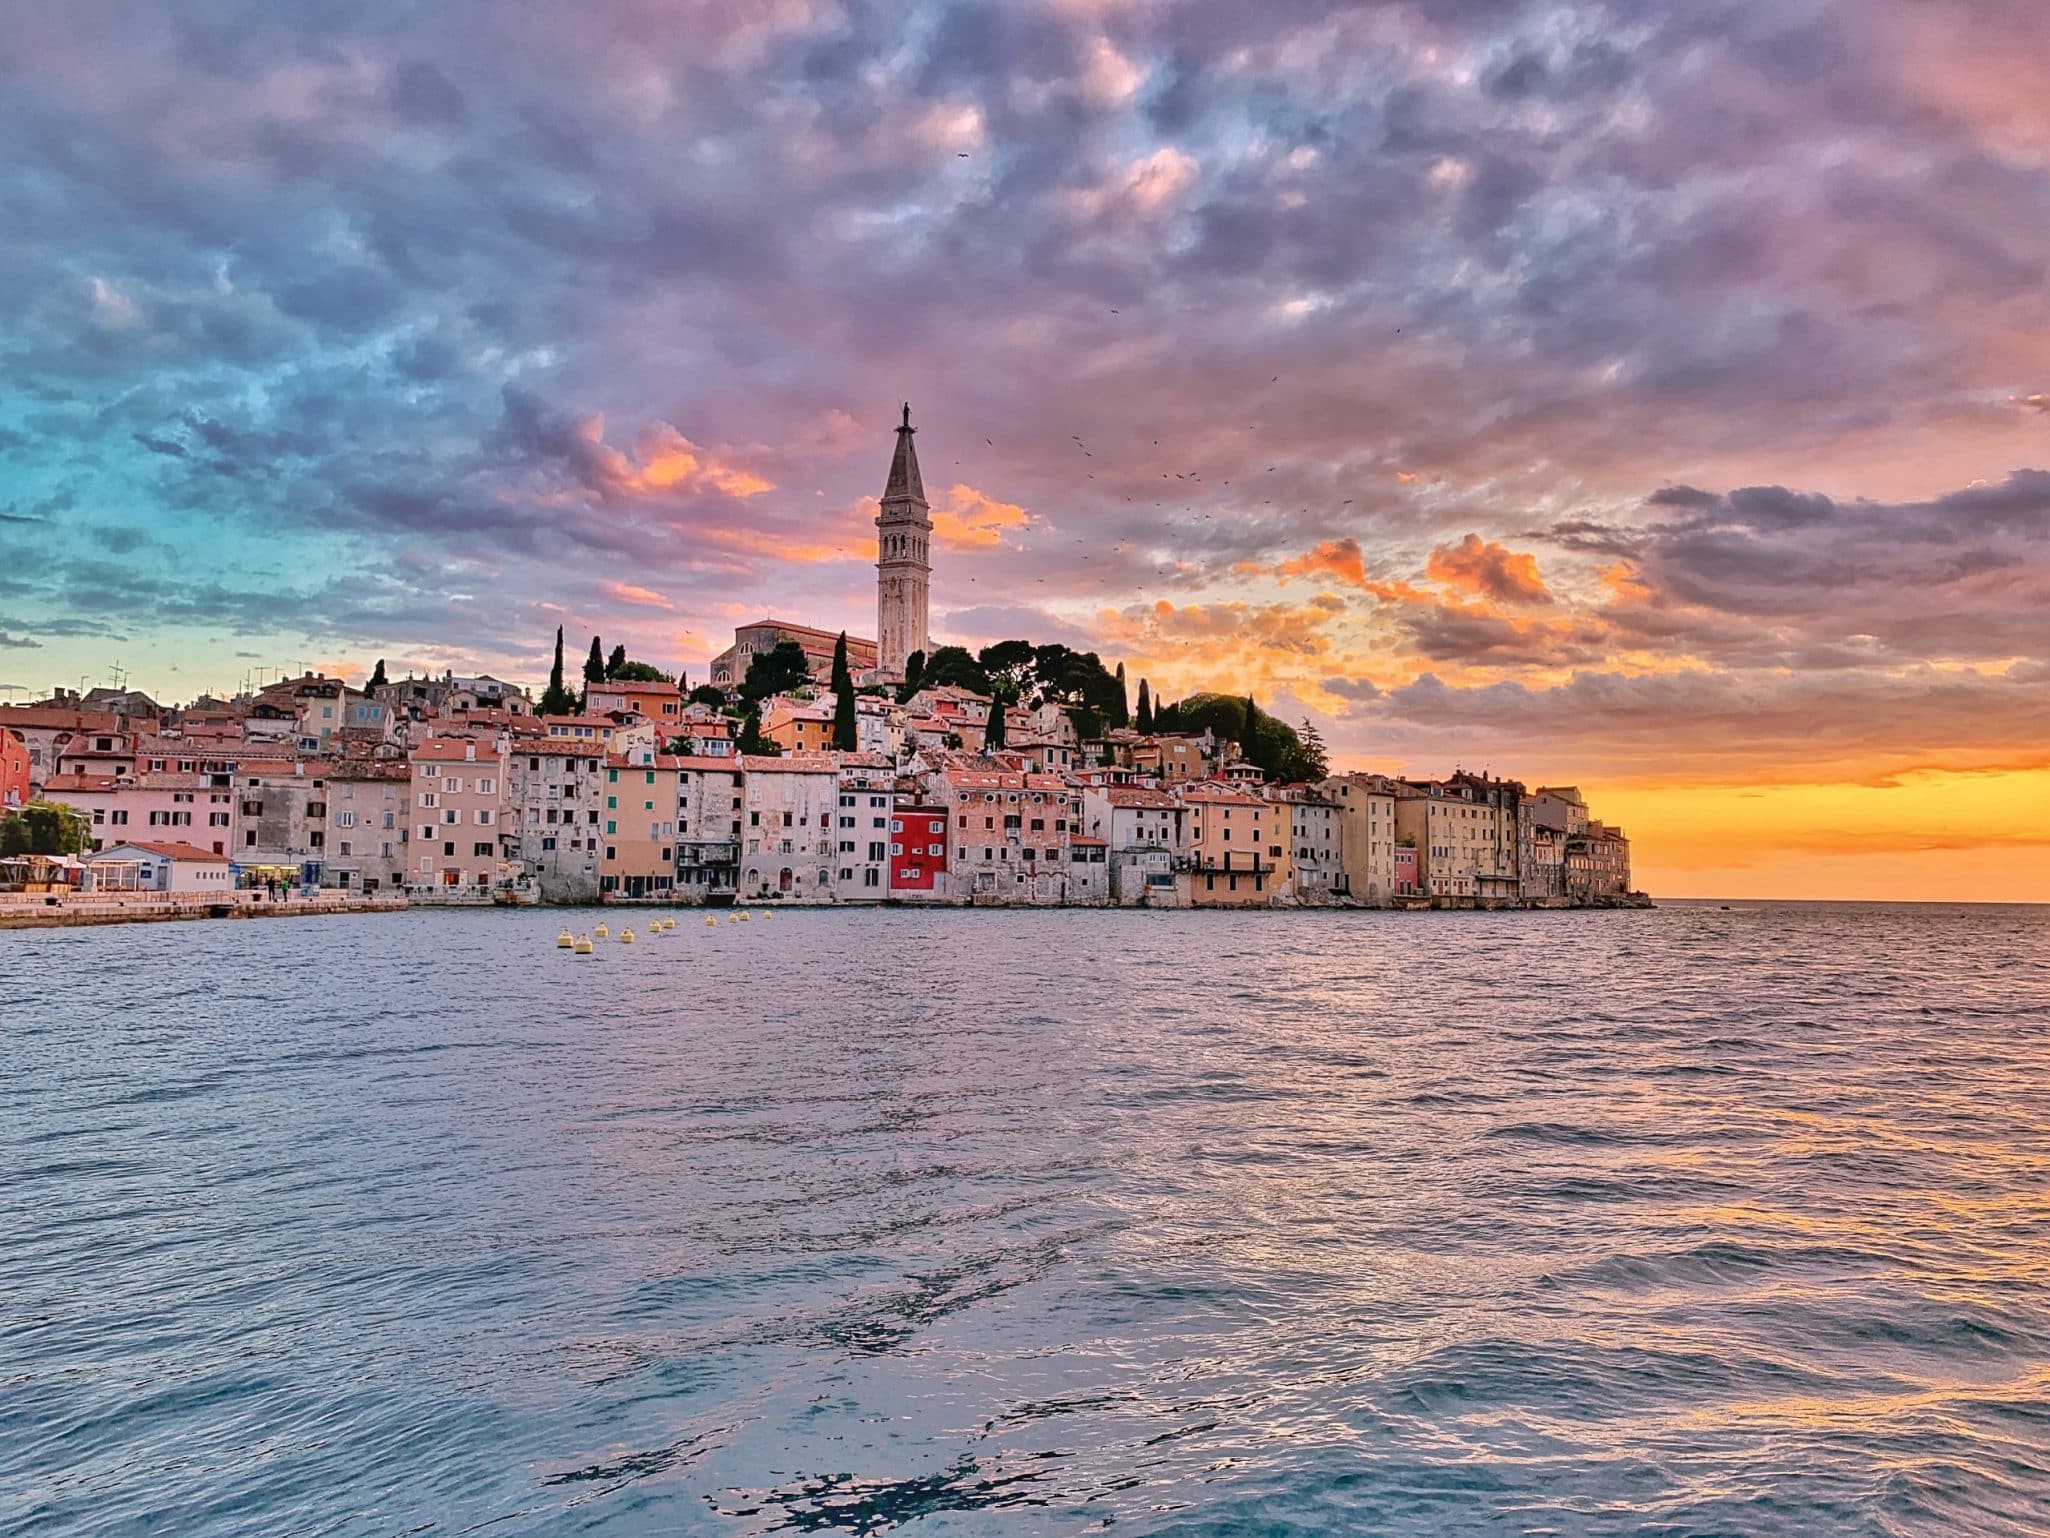 The ultimate Croatia travel guide for first-timers